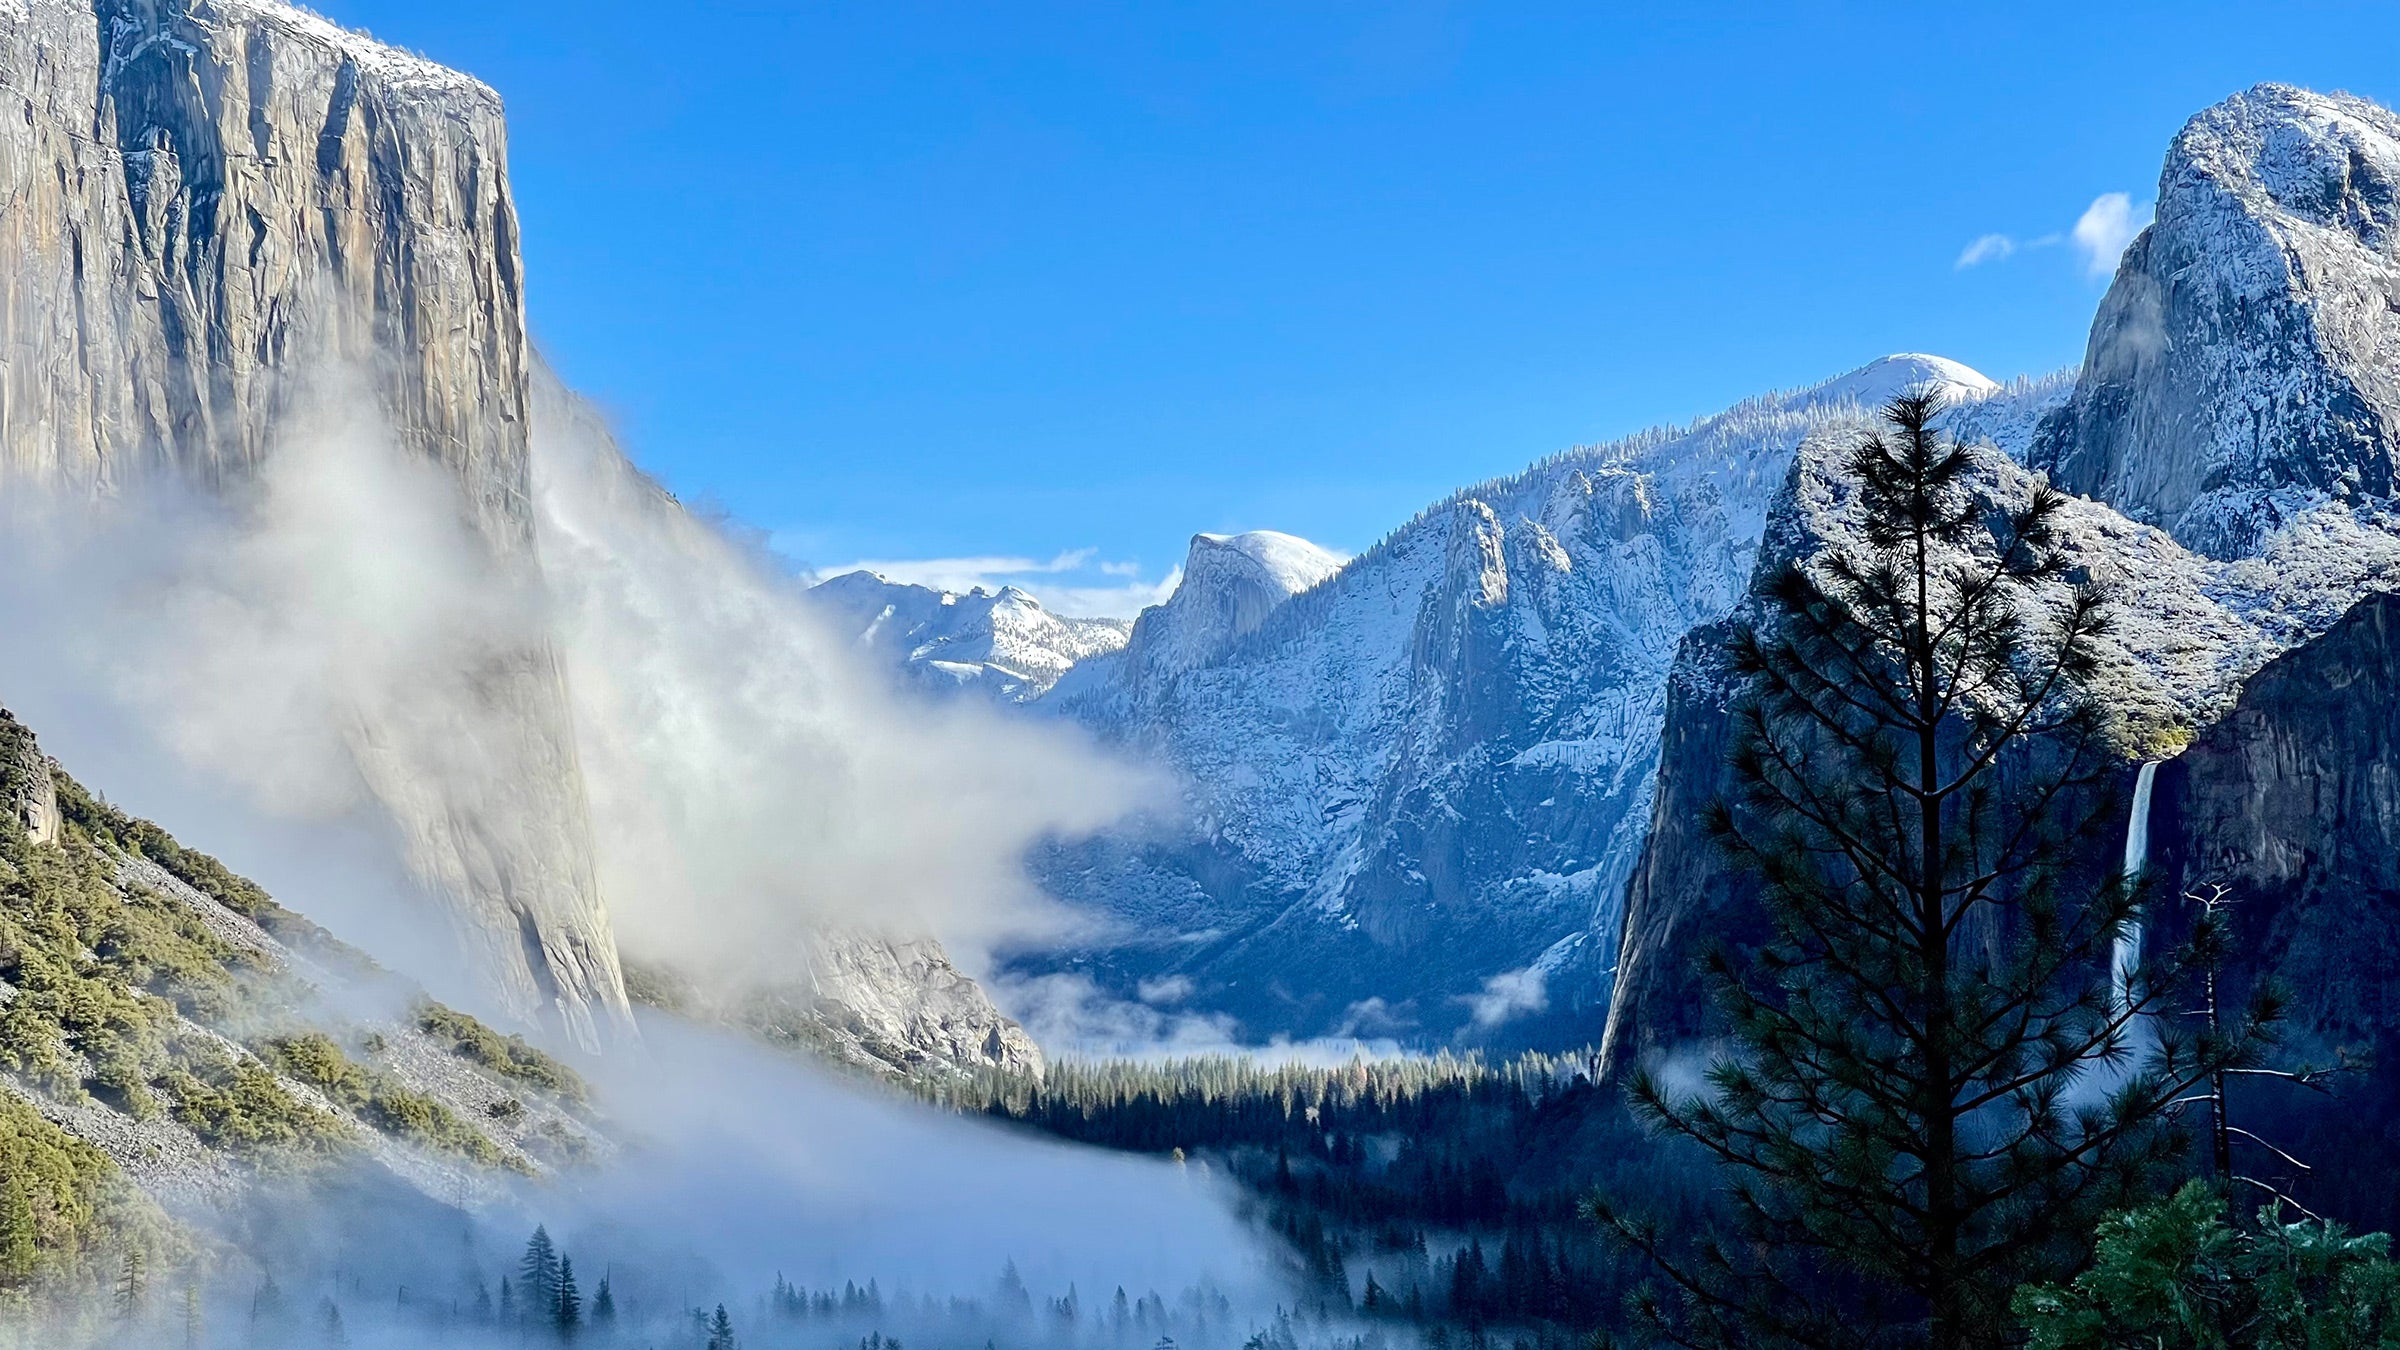 After the storms, Yosemite shines, while the waterfalls go nuts